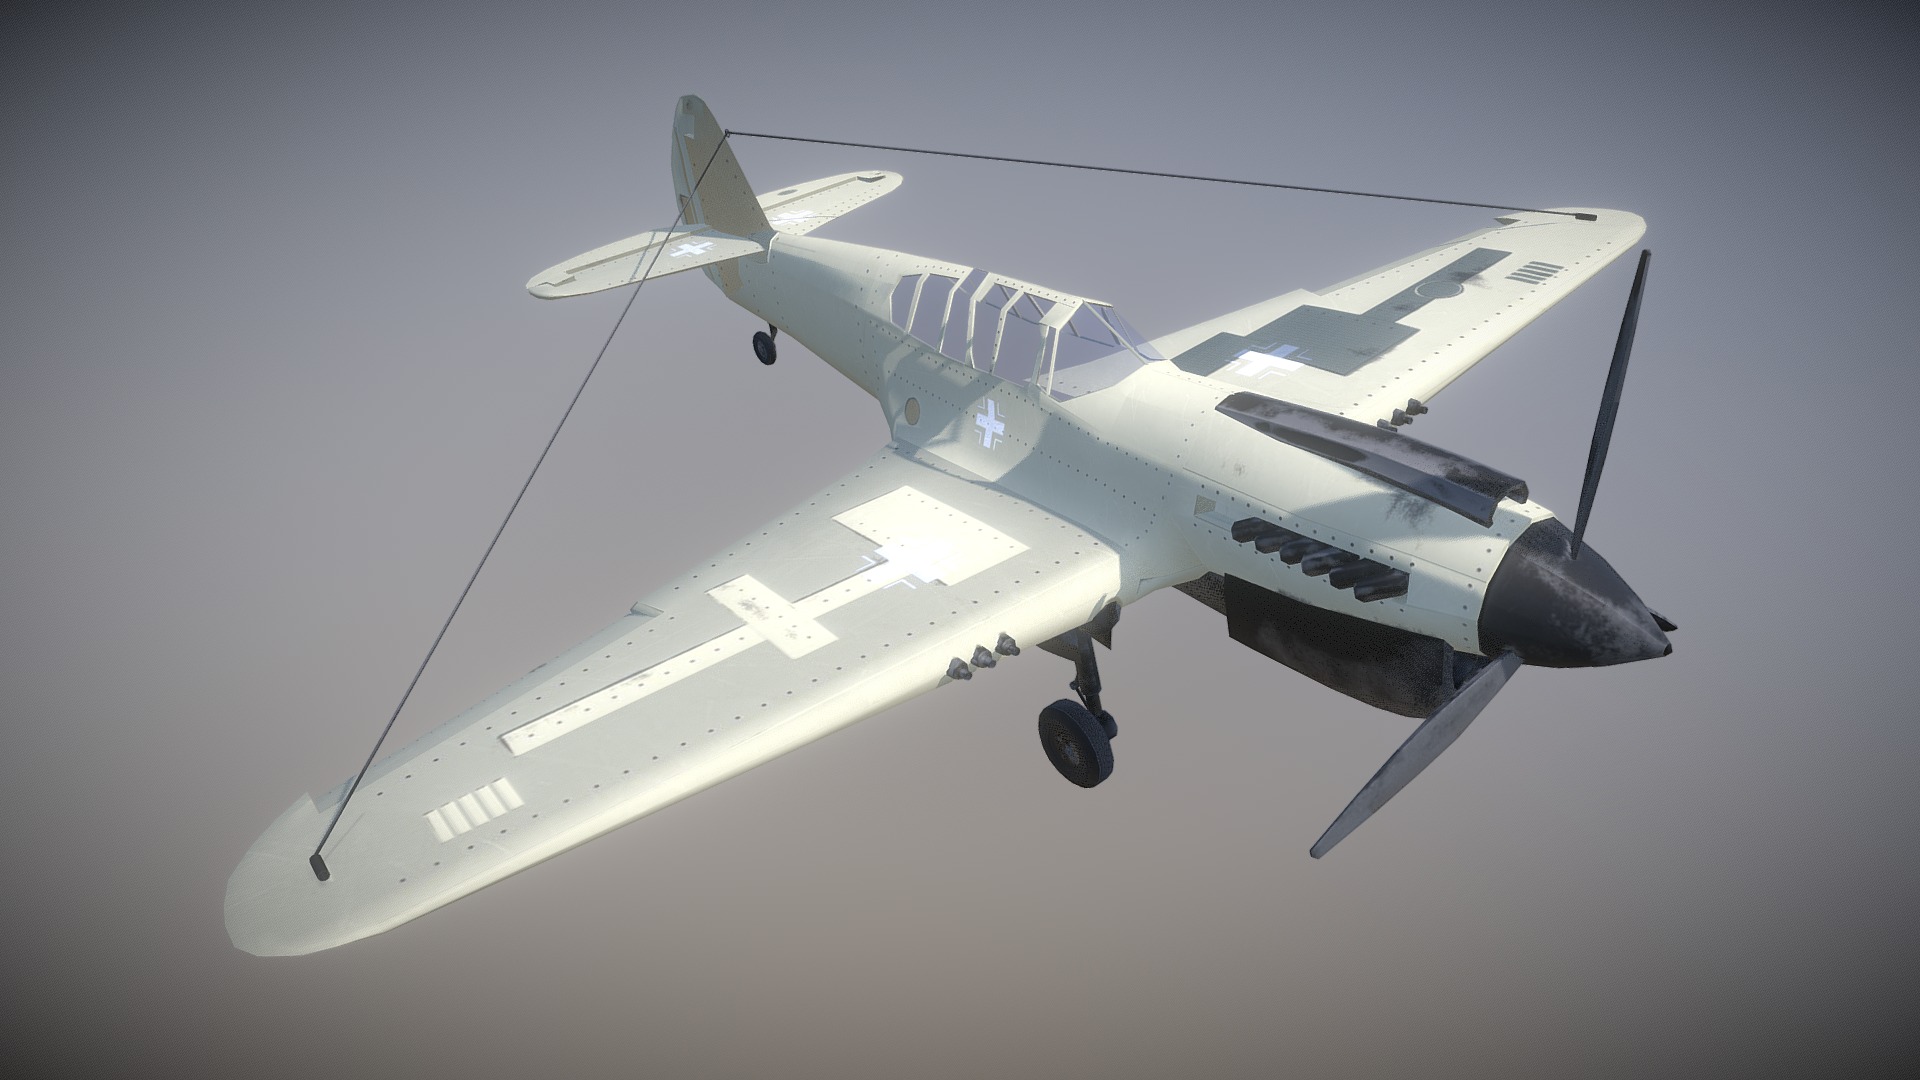 3D model Plane white - This is a 3D model of the Plane white. The 3D model is about a white airplane in the sky.